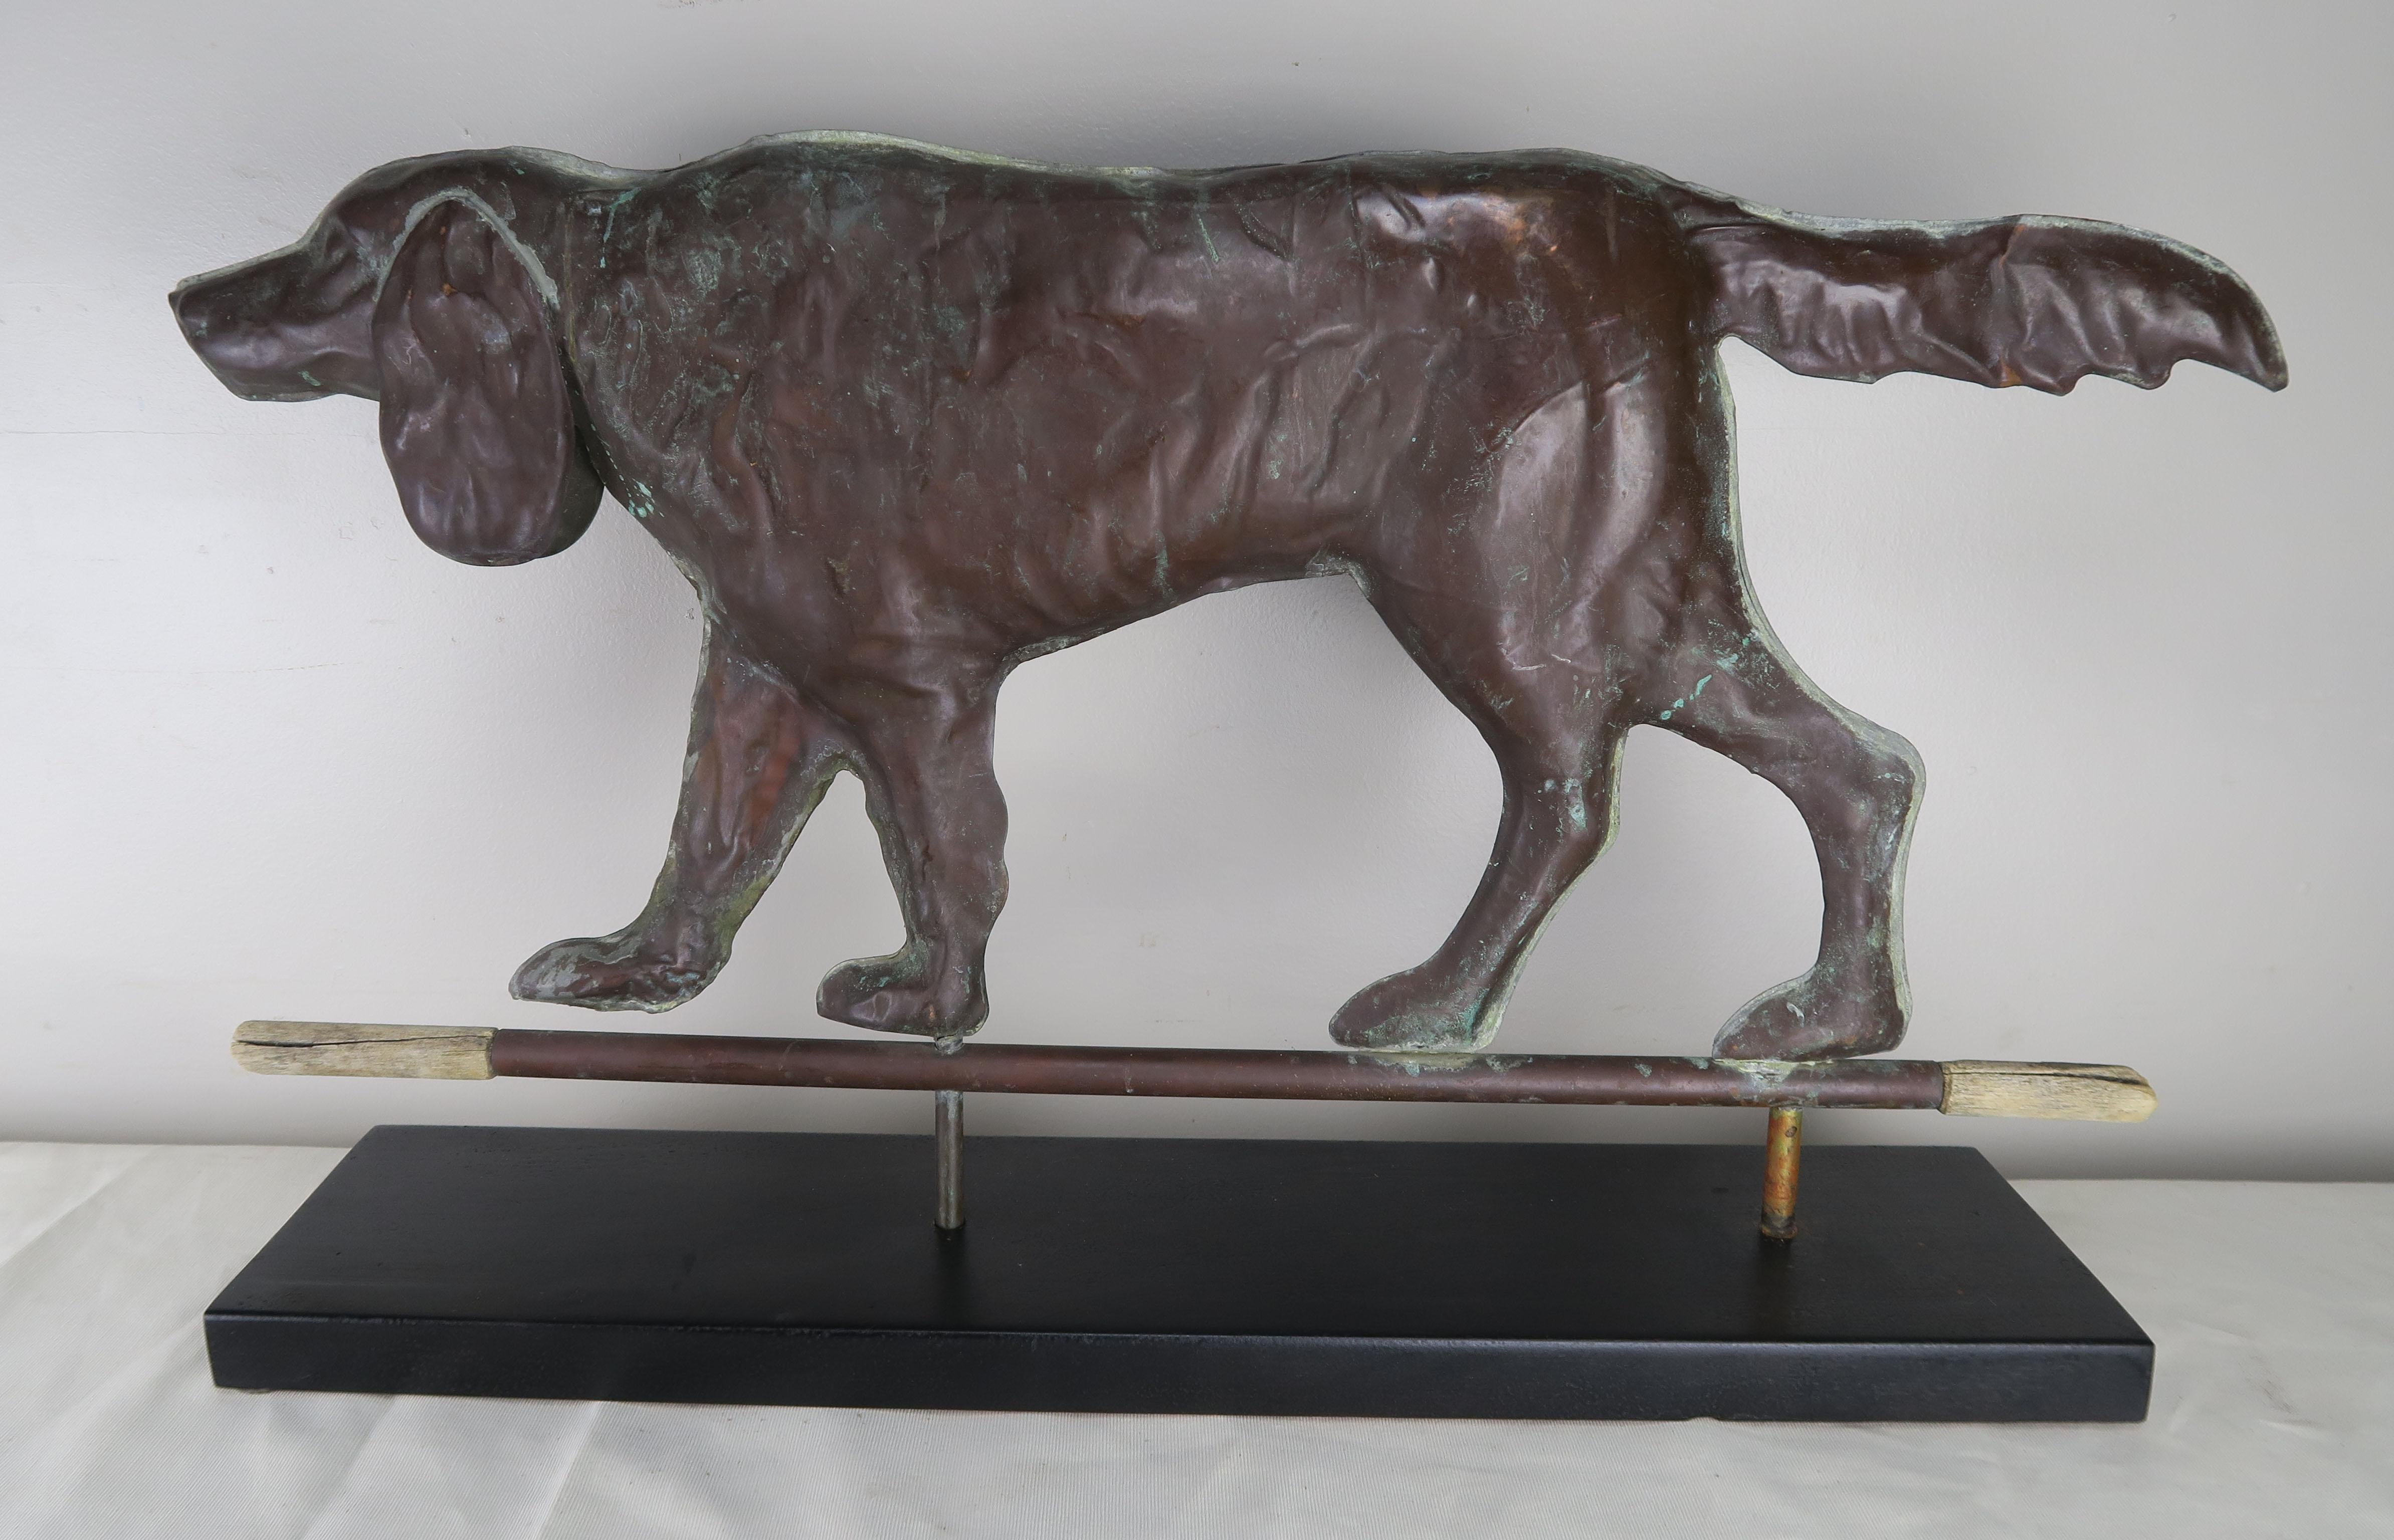 Charming vintage copper dog weathervane that has been newly mounted on a wrought iron and wood base. It is a perfect mantel (fireplace) decor. Wear consistent with age and use.